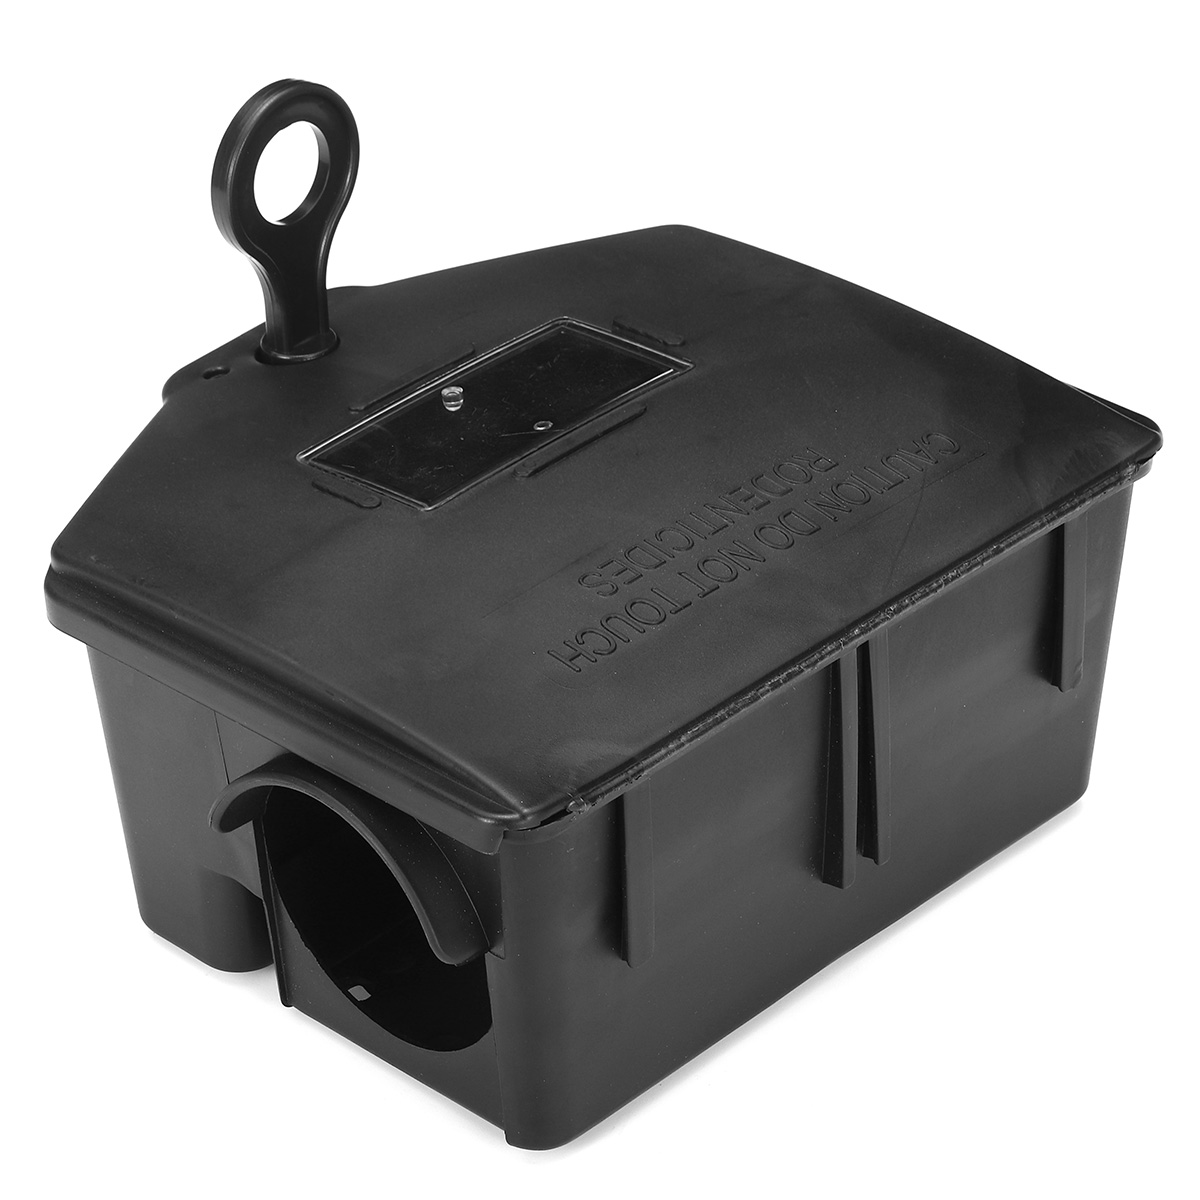 Rat-Mouse-Mice-Rodent-Bait-Block-Station-Box-Case-Trap-amp-Key-Hunting-Trap-for-Home-Farm-Hotel-1635967